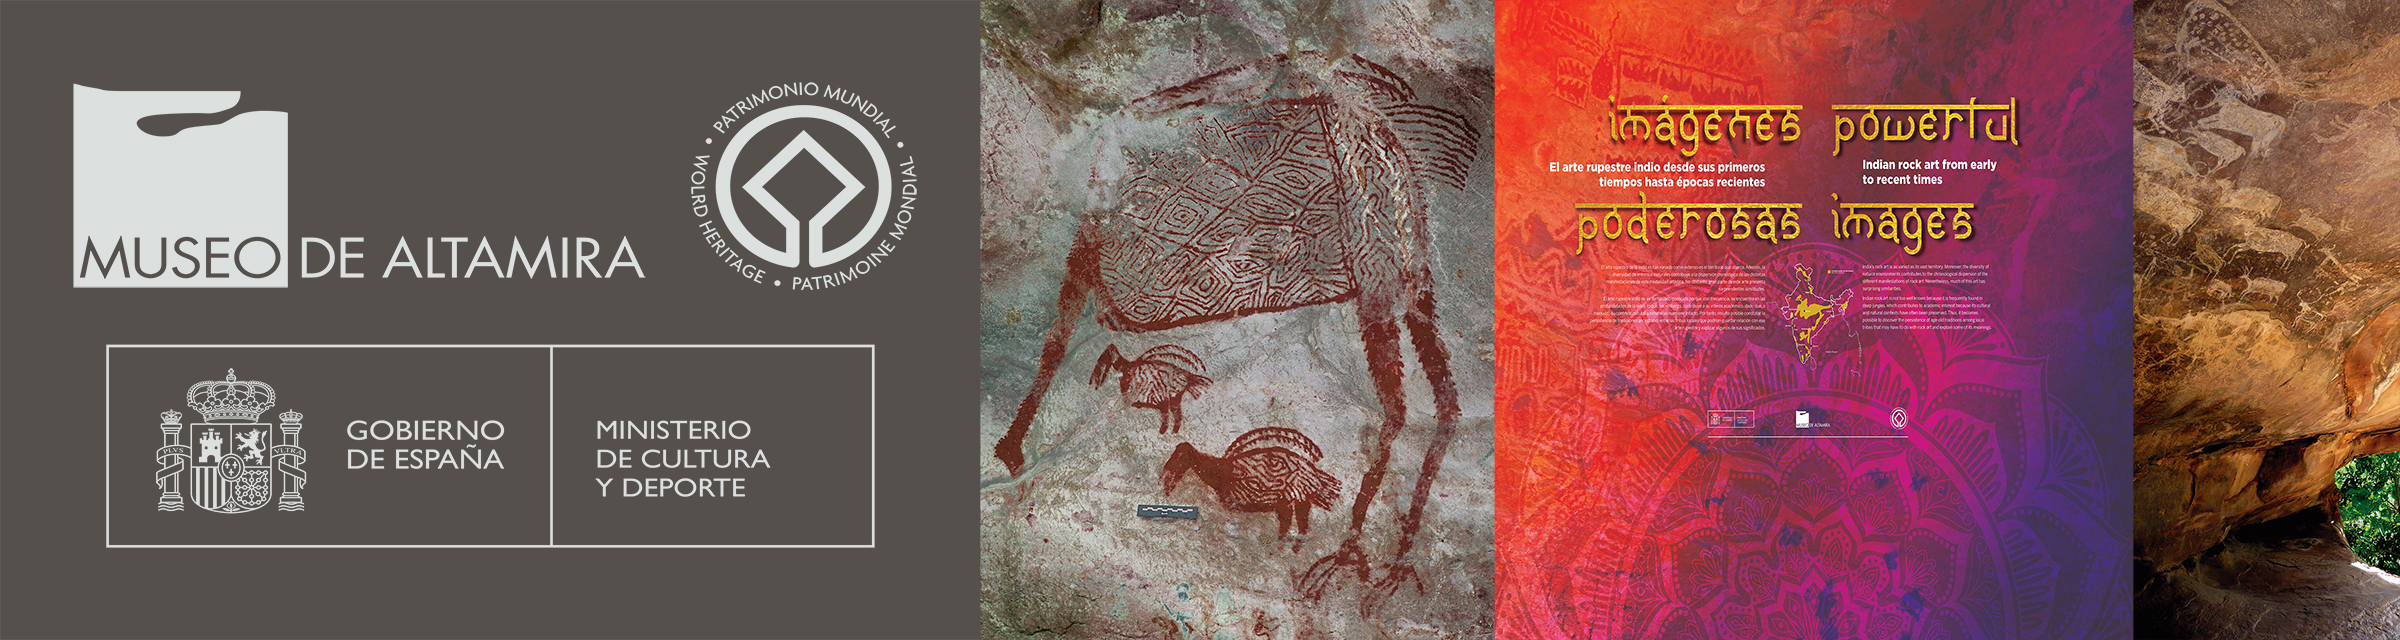 Powerful Images India Indian Rock Art from early to recent times Archaeology National Museum and Research Center of Altamira Rock Art Network RAN